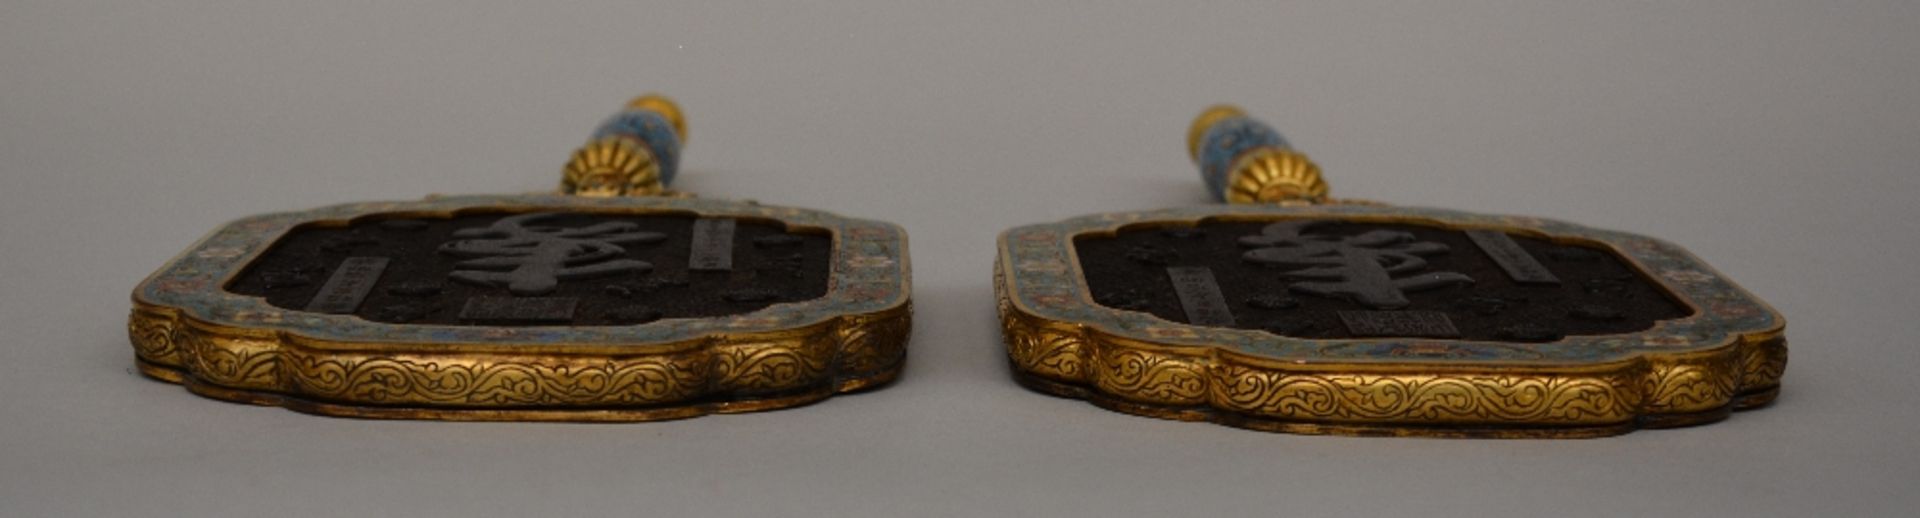 A pair of exceptional Chinese hand mirrors, gilt bronze and cloisonné decoration, the back side - Bild 5 aus 8